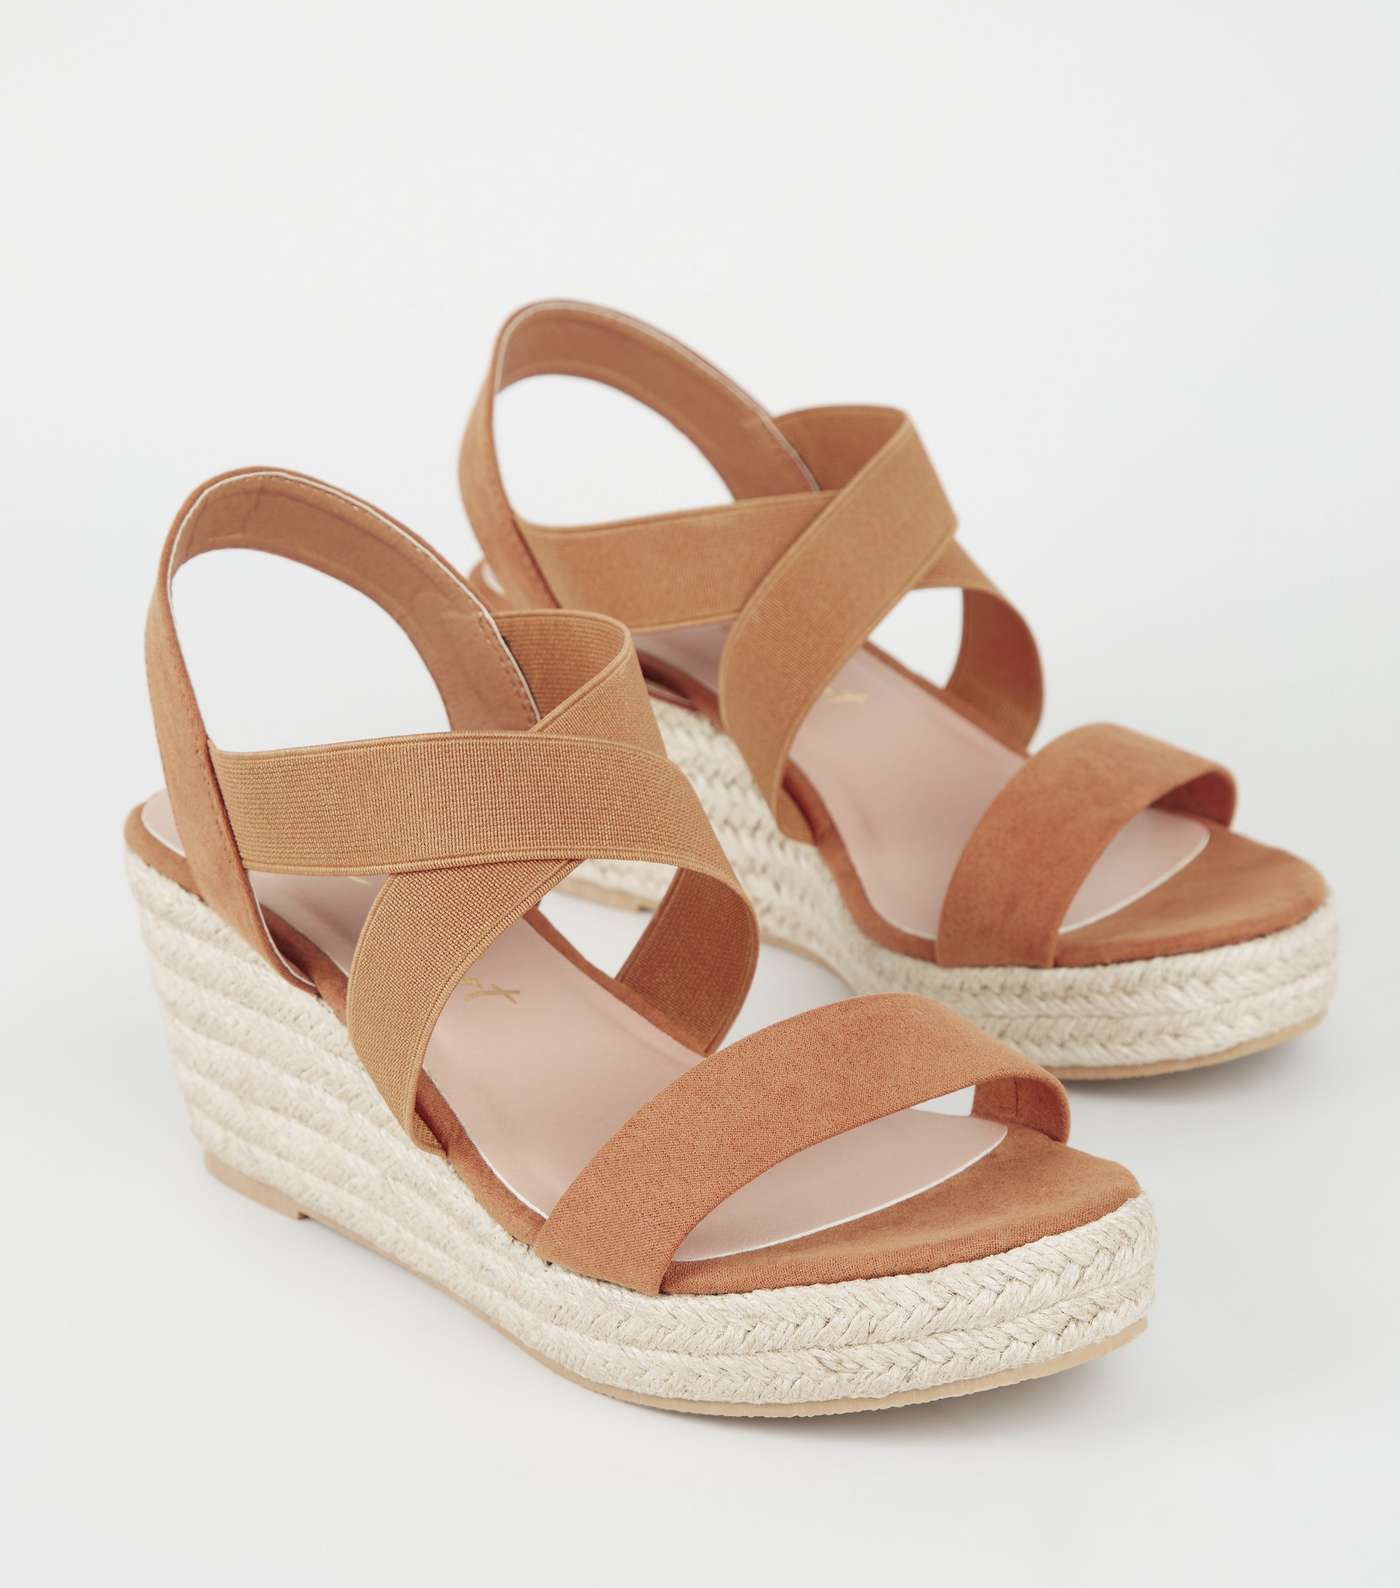 Wide Fit Tan Suedette Elasticated Espadrille Wedges Image 4